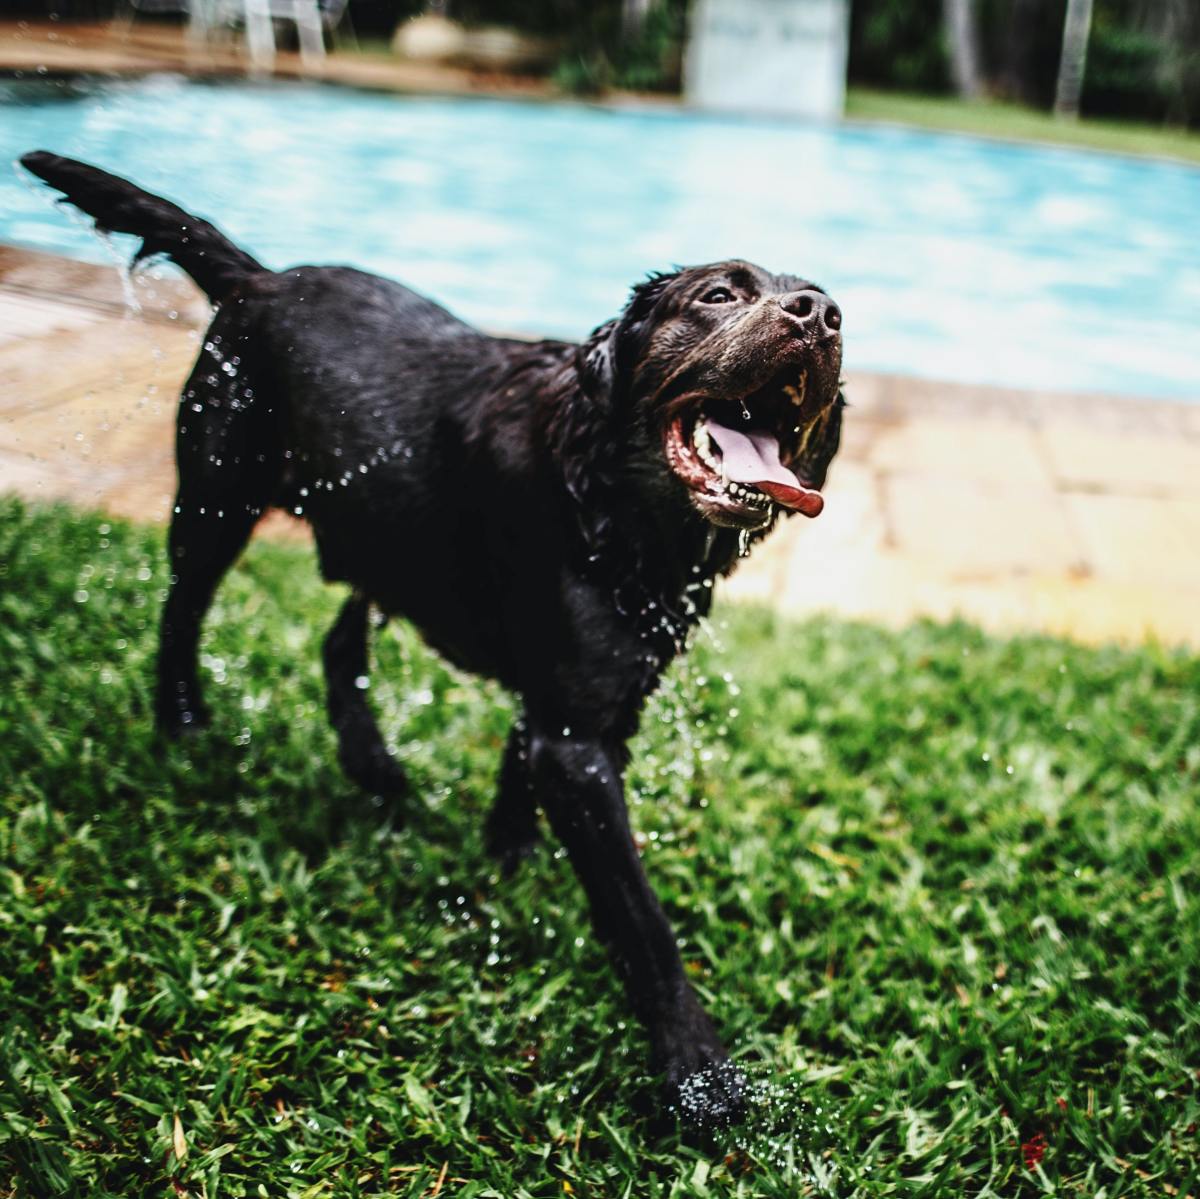 With proper access to water and shade, certain dogs are able to stay outdoors for up to 12 hours at a time. 